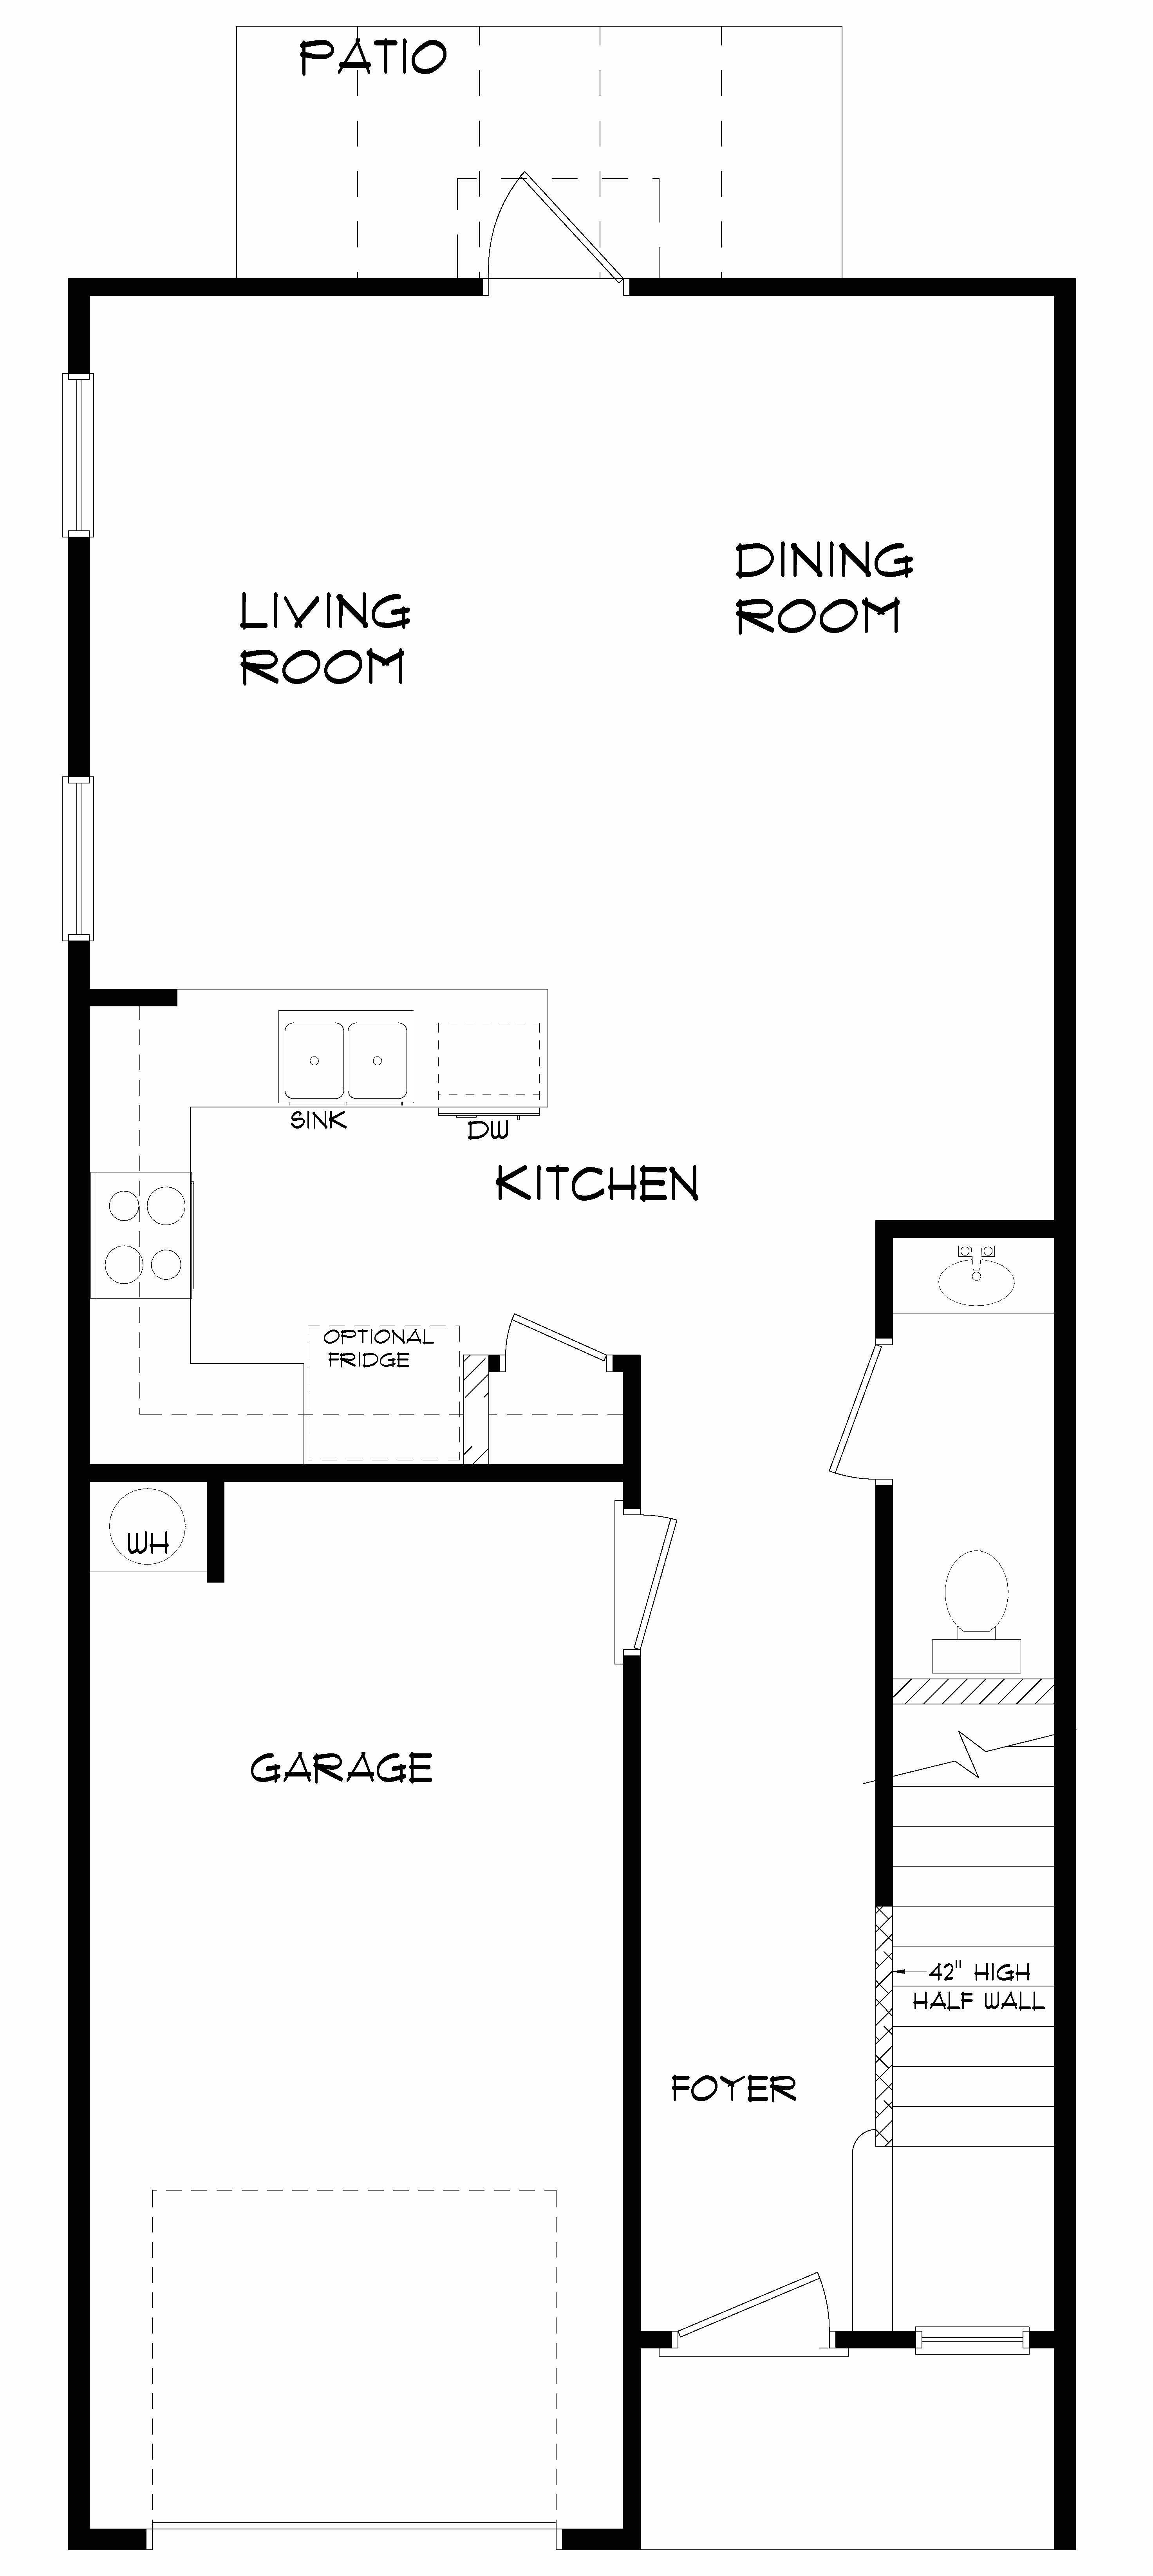 The Palm A townhome first floorplan layout.